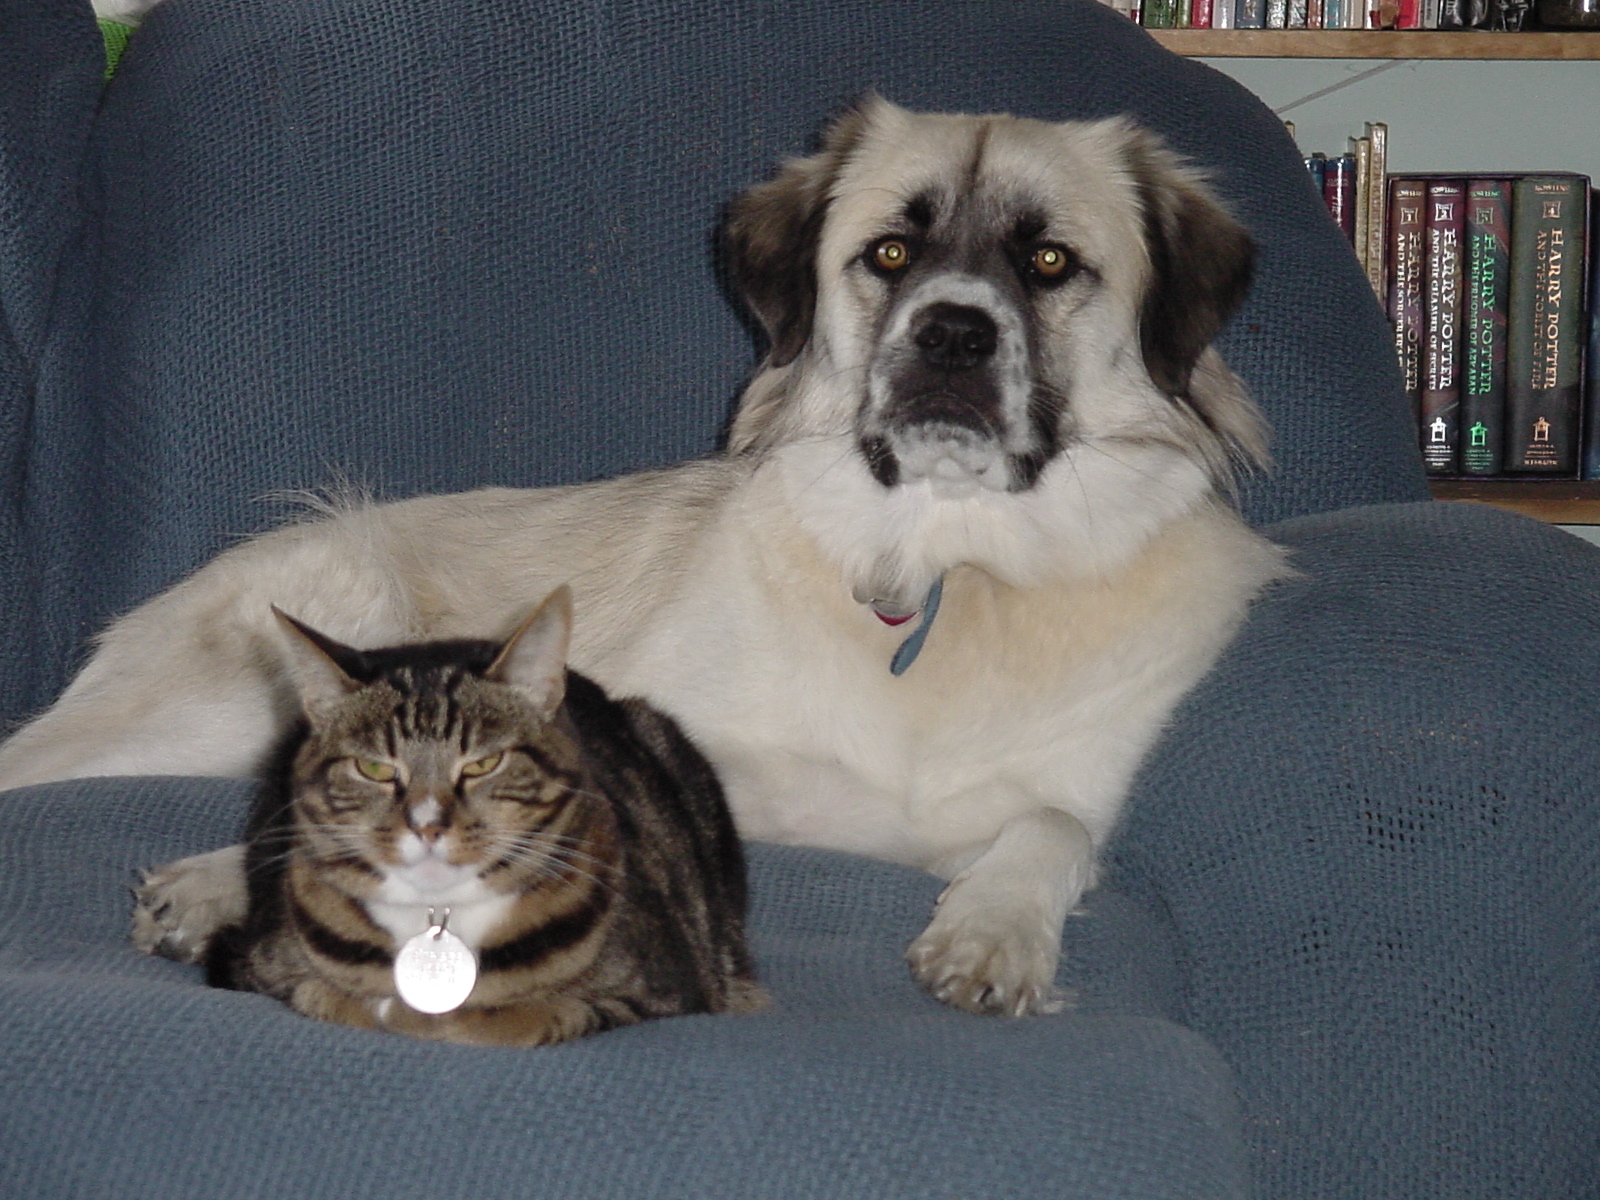 Herman and Strips pose distinctively on sofa